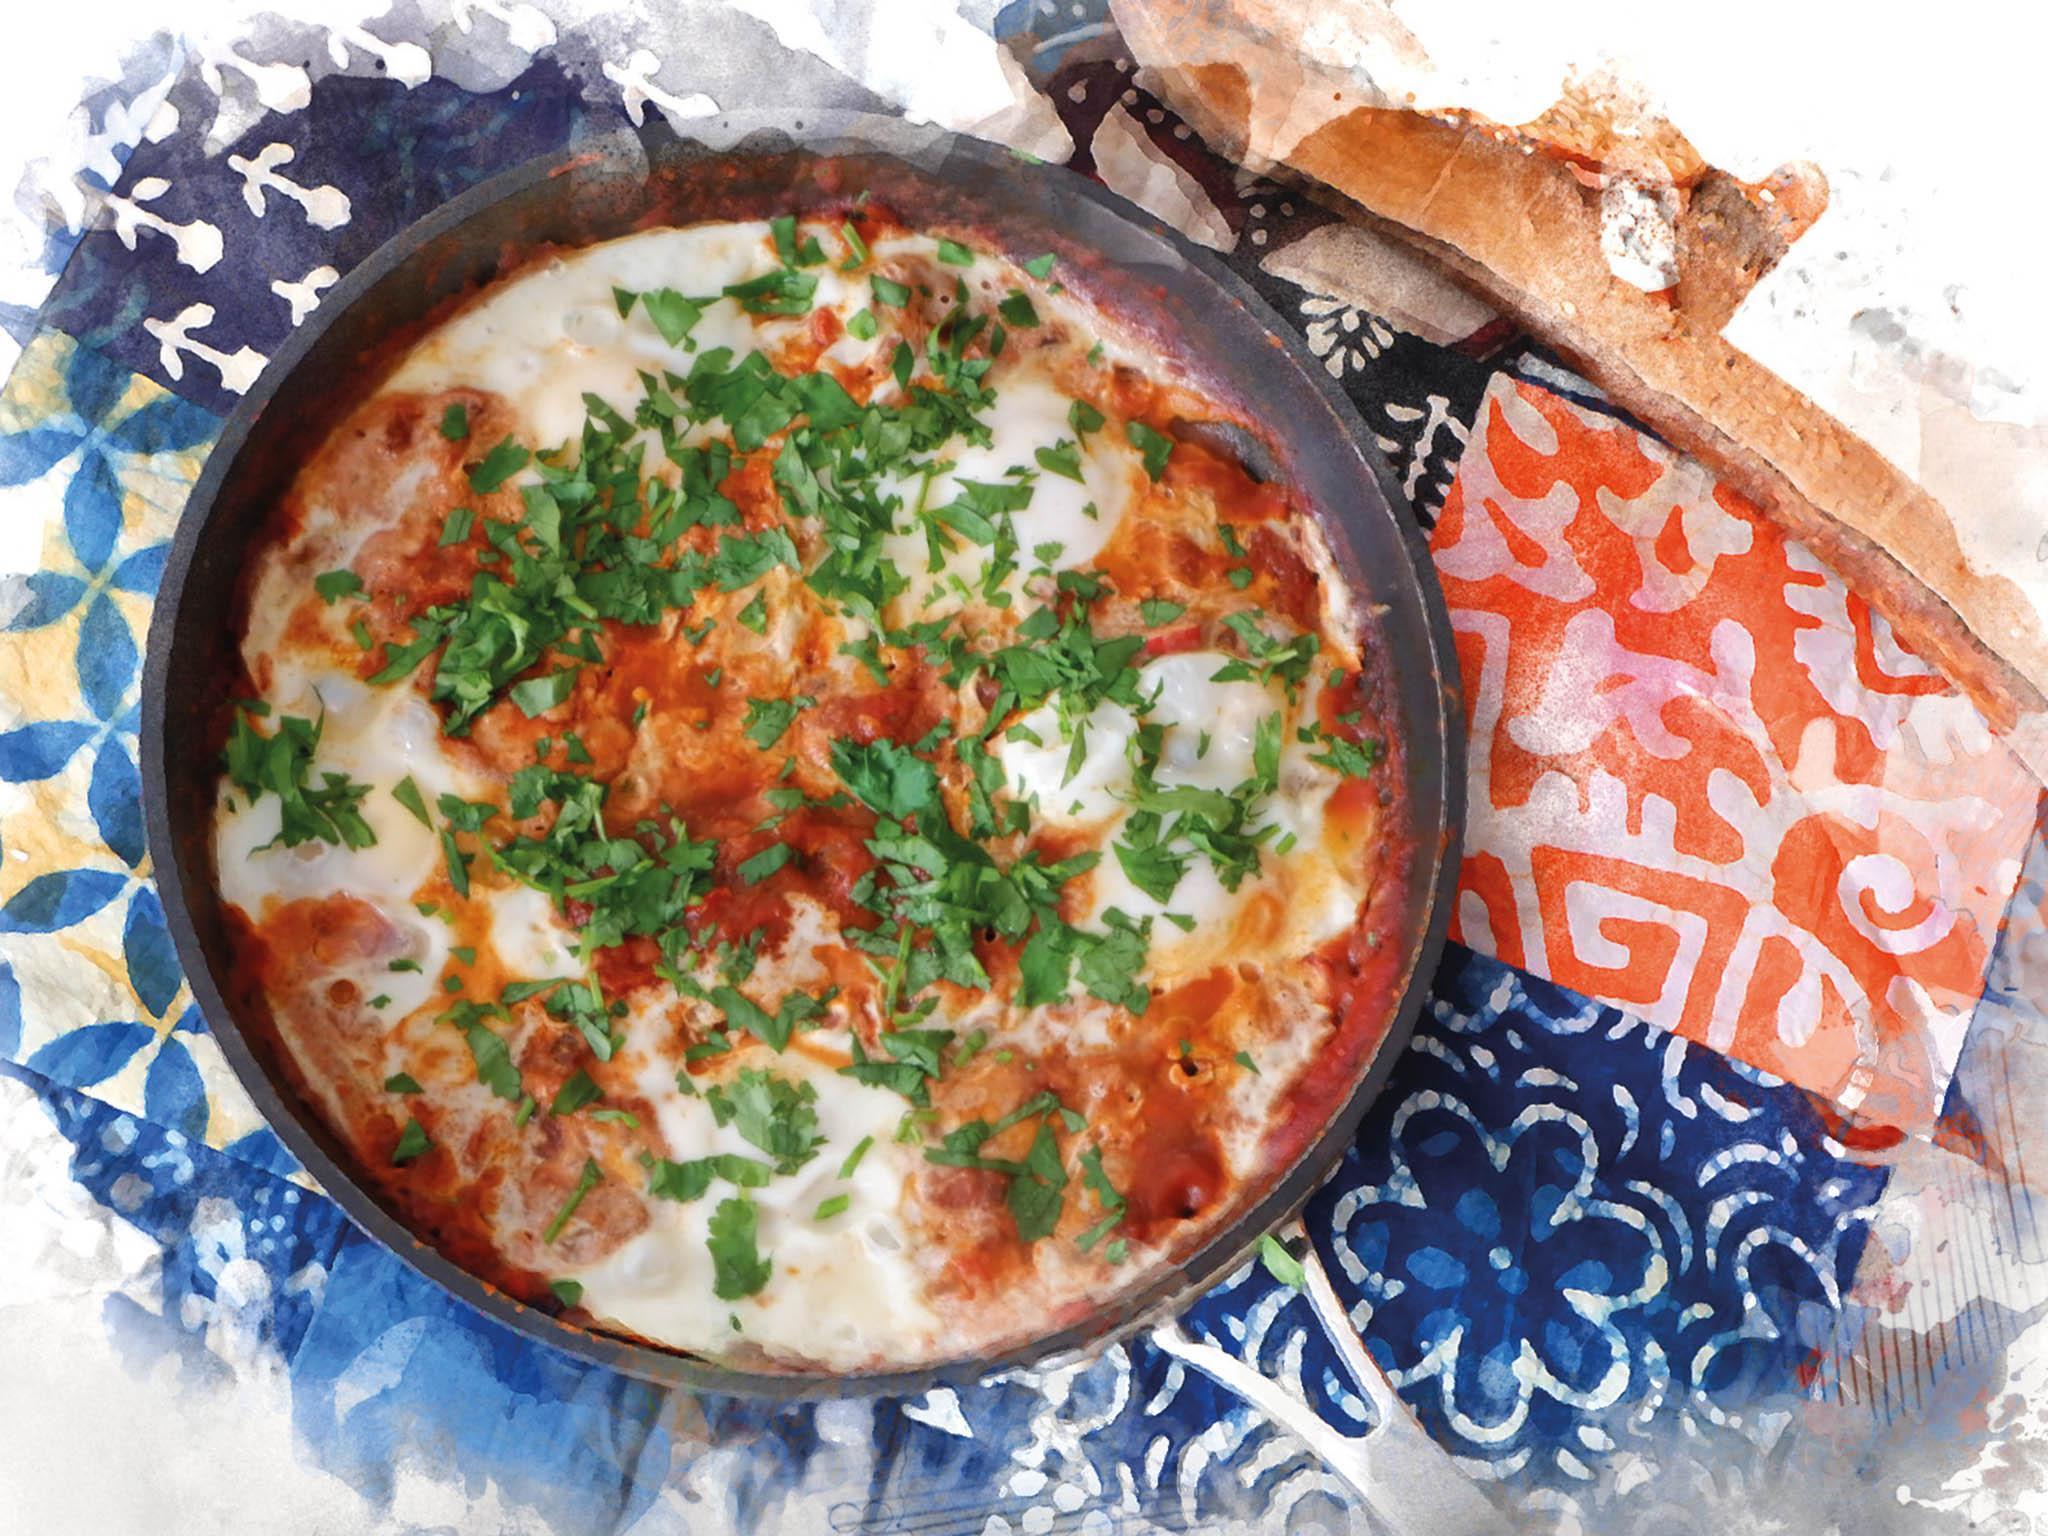 Shakshuka combines poached eggs and tomatoes with a kick of chilli